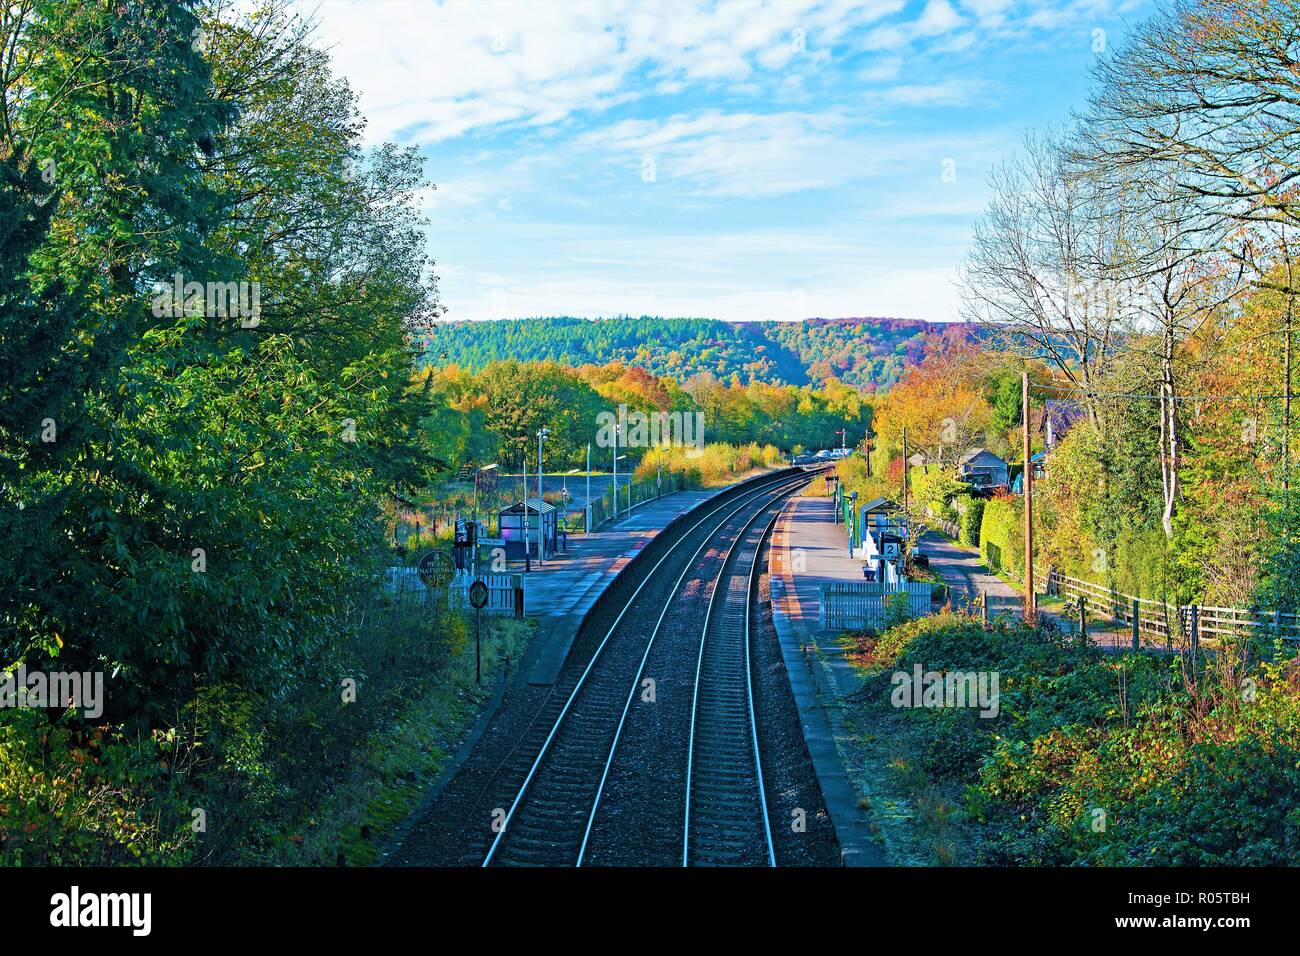 Capturing the railway network, through Totley tunnel into Grindlebrook station, in Derbyshire. Stock Photo